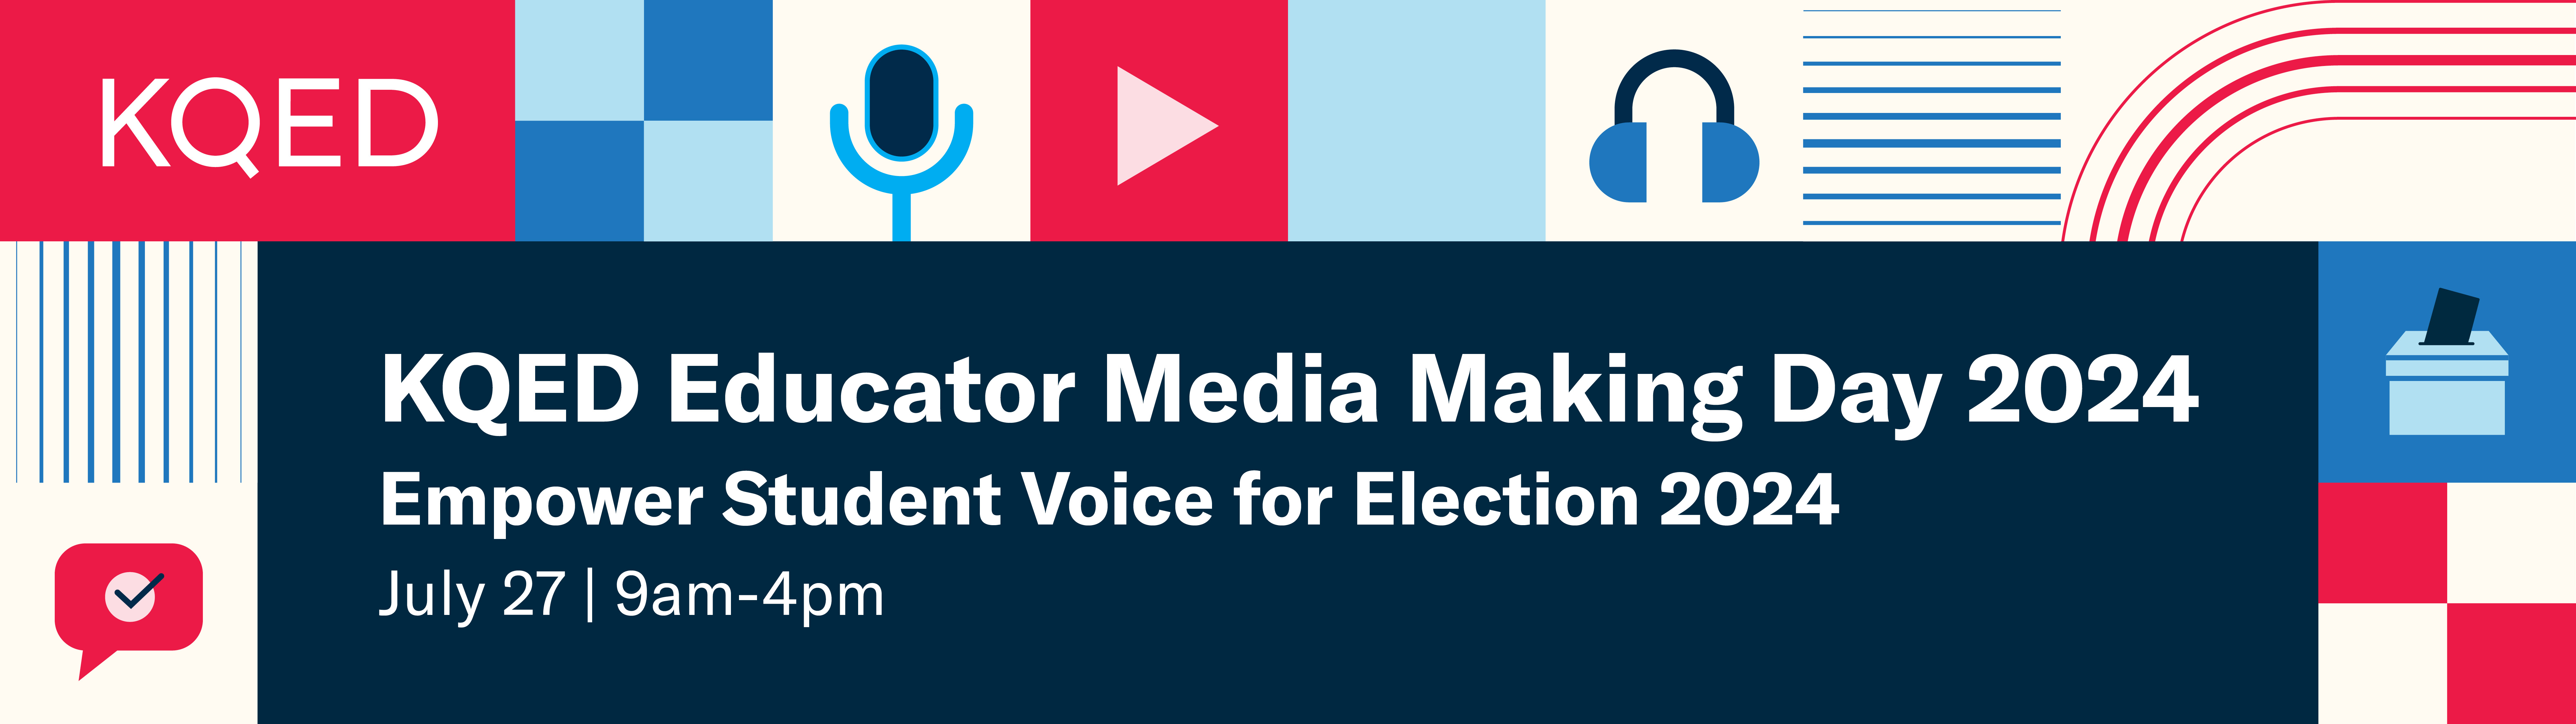 KQED Educator Media Making Day 2024: Empower Student Voice for Election 2024